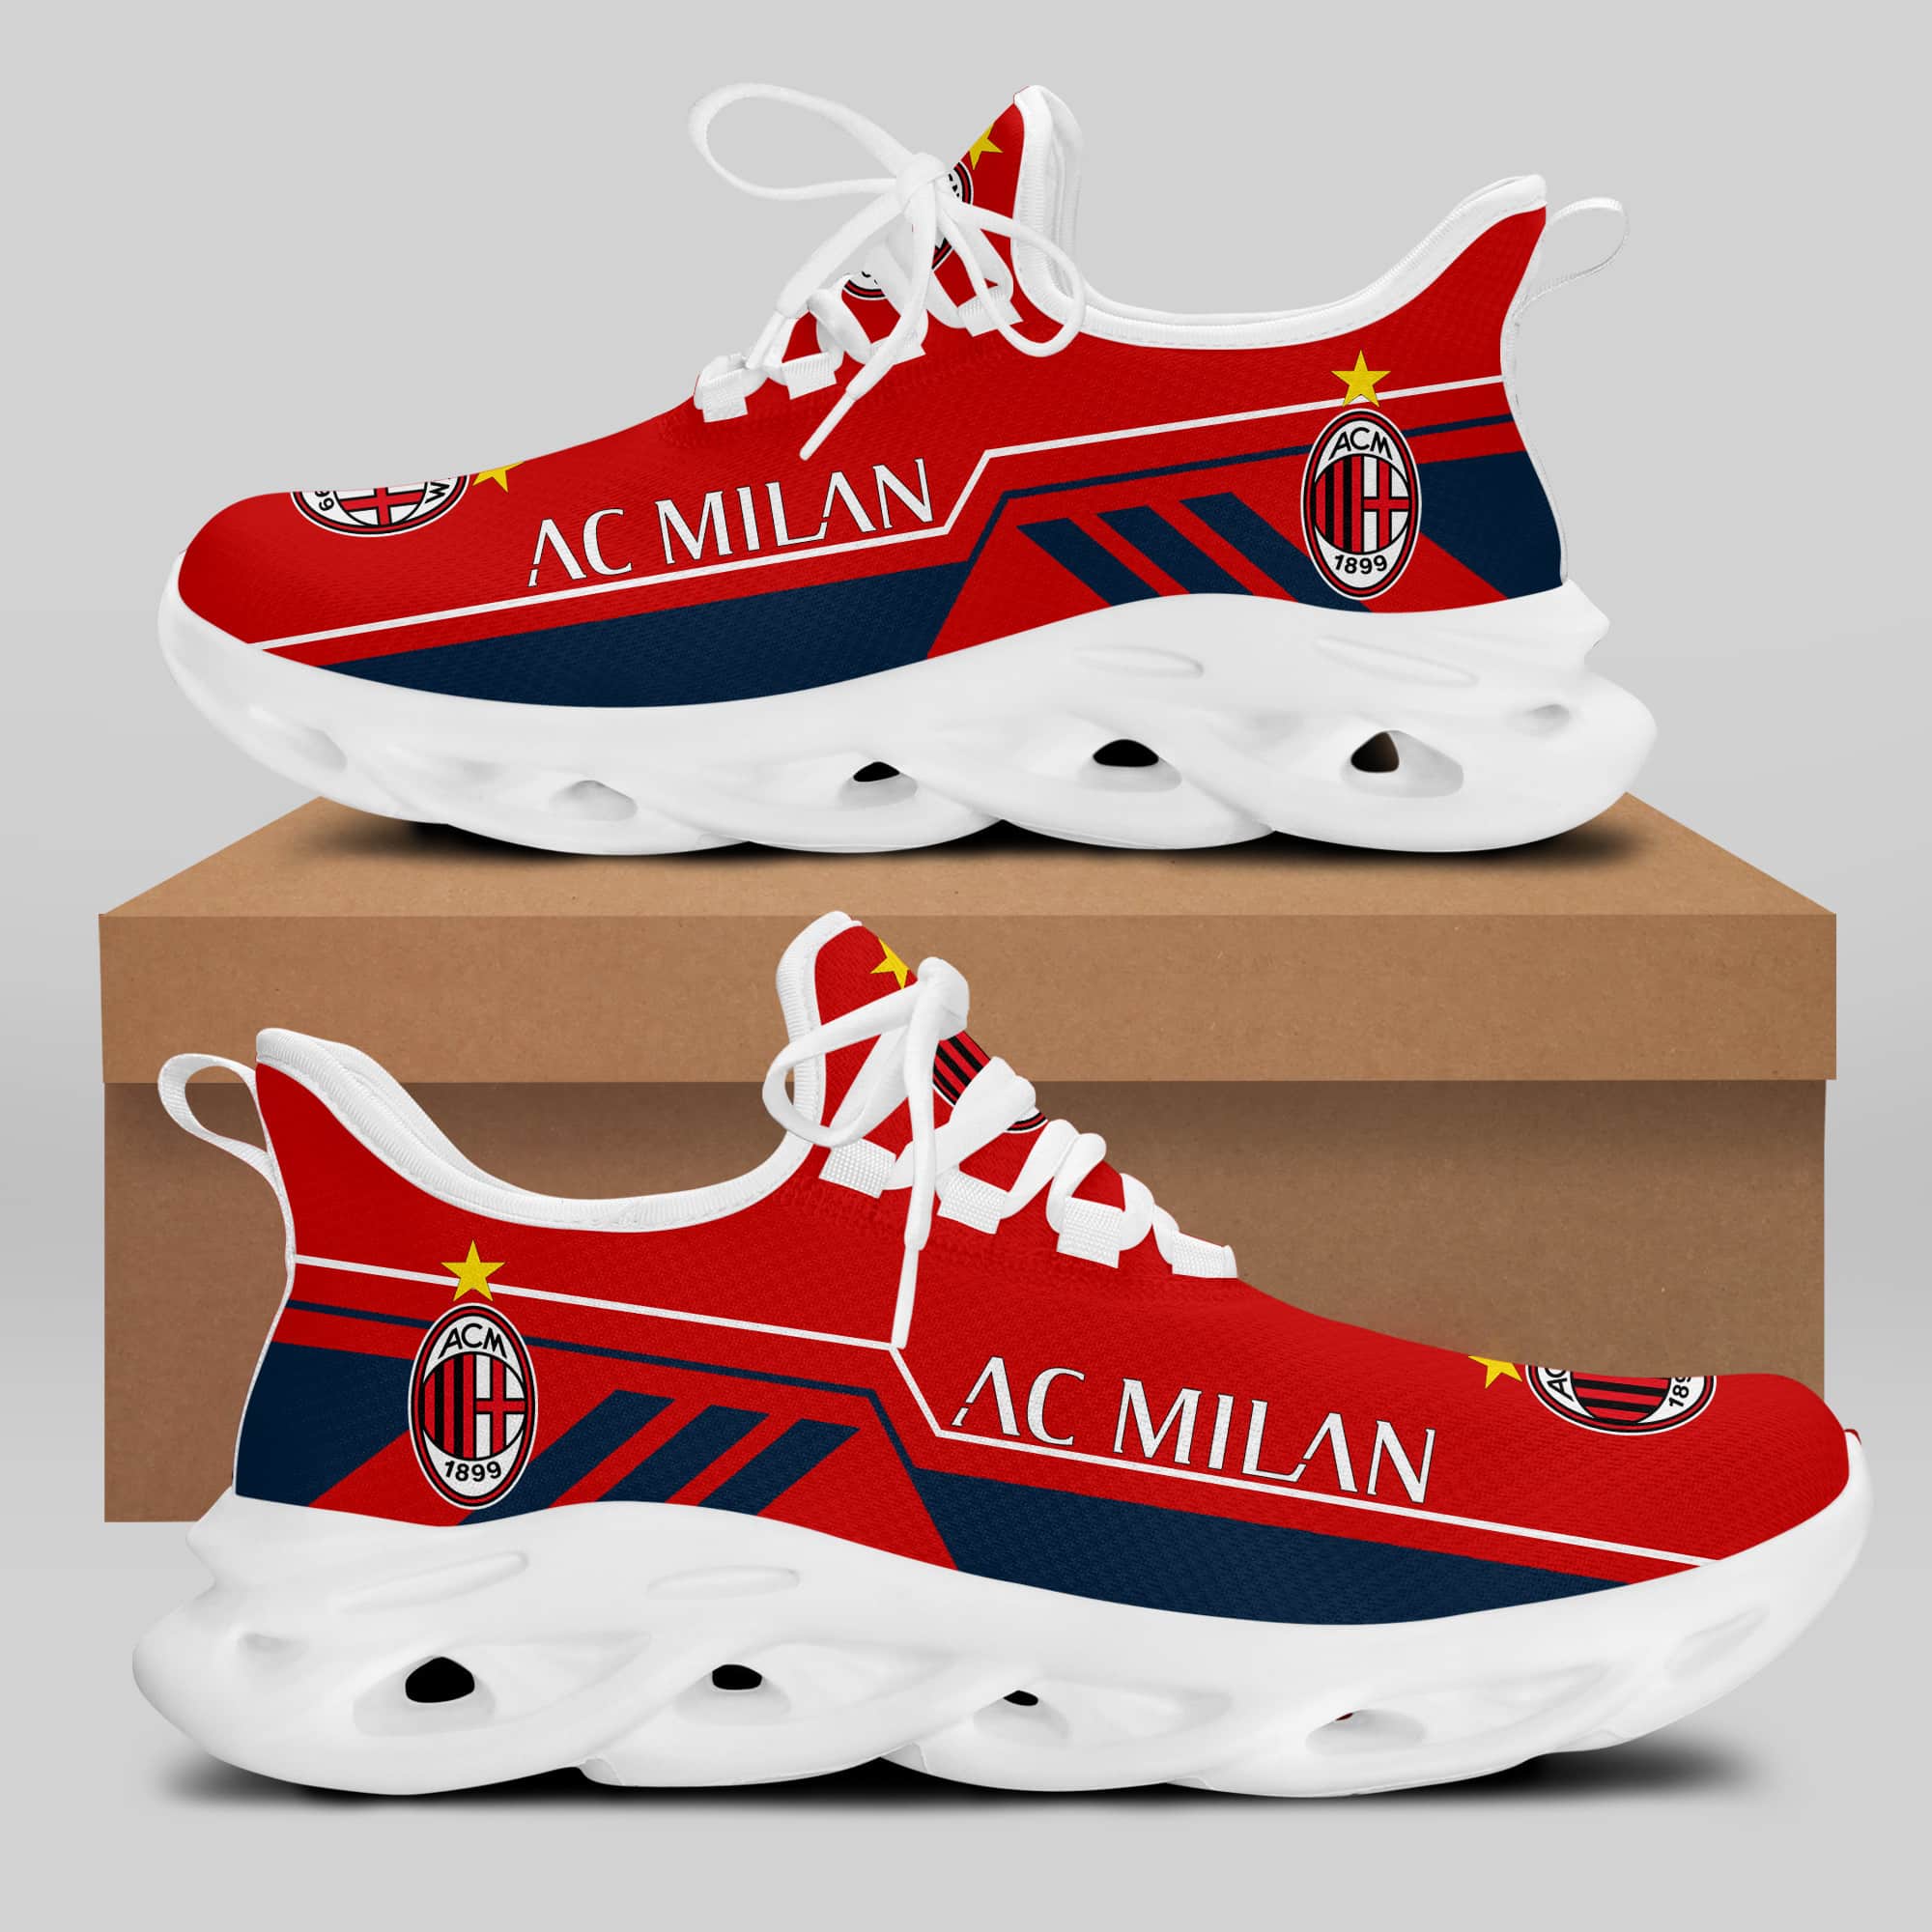 Ac Milan Running Shoes Max Soul Shoes Sneakers Ver 15 2